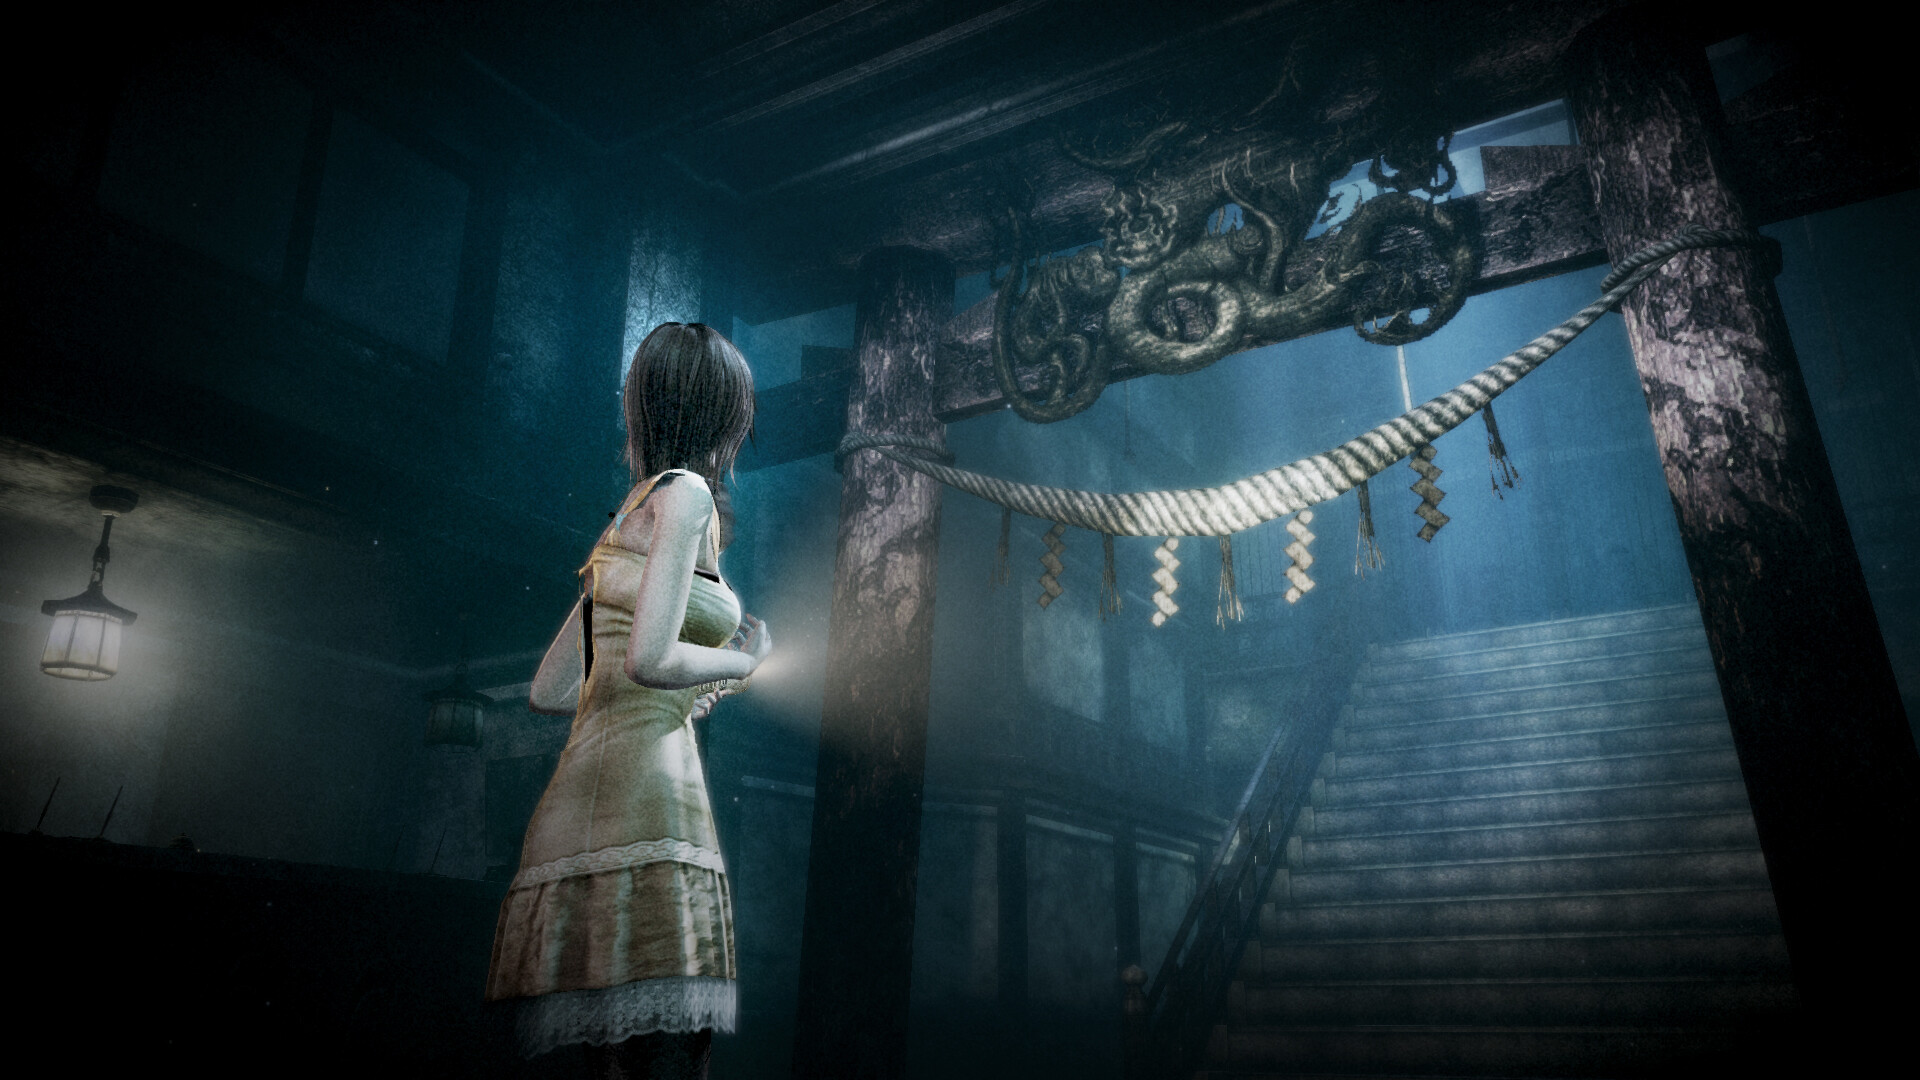 [$ 16.94] FATAL FRAME / PROJECT ZERO: Mask of the Lunar Eclipse Steam Account